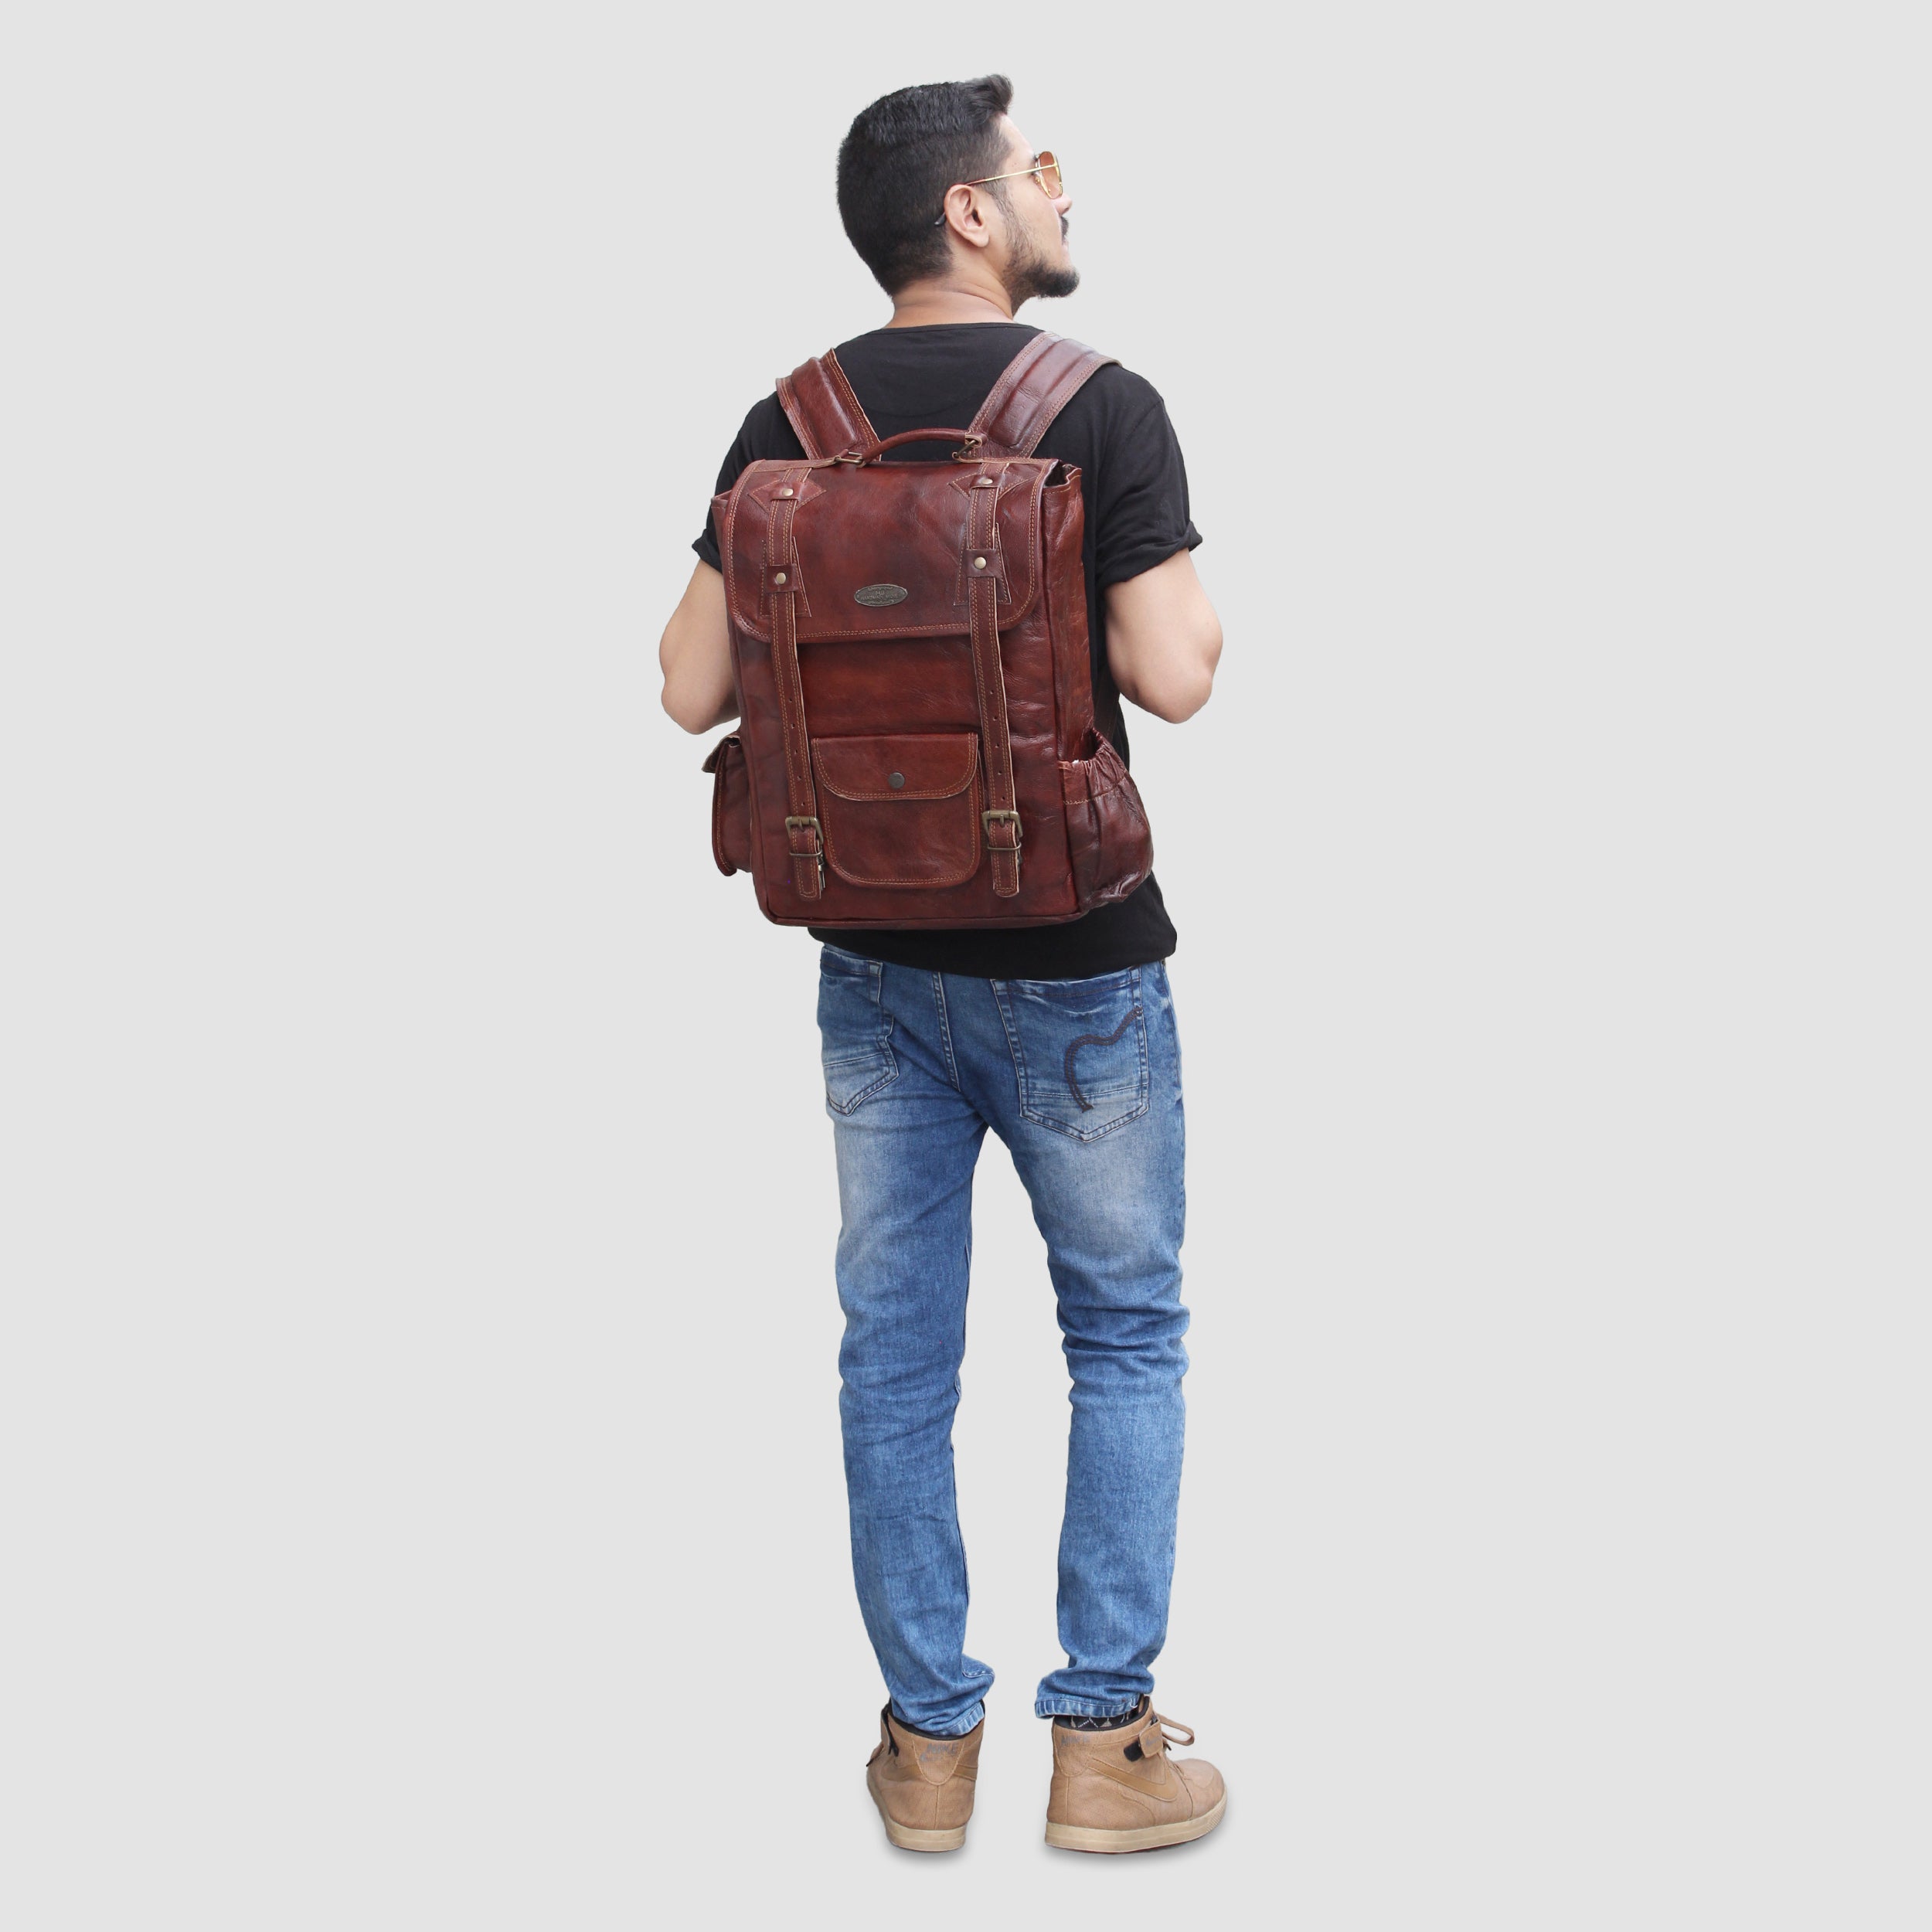 Back View Of Model with Genuine Leather Backpack Bag